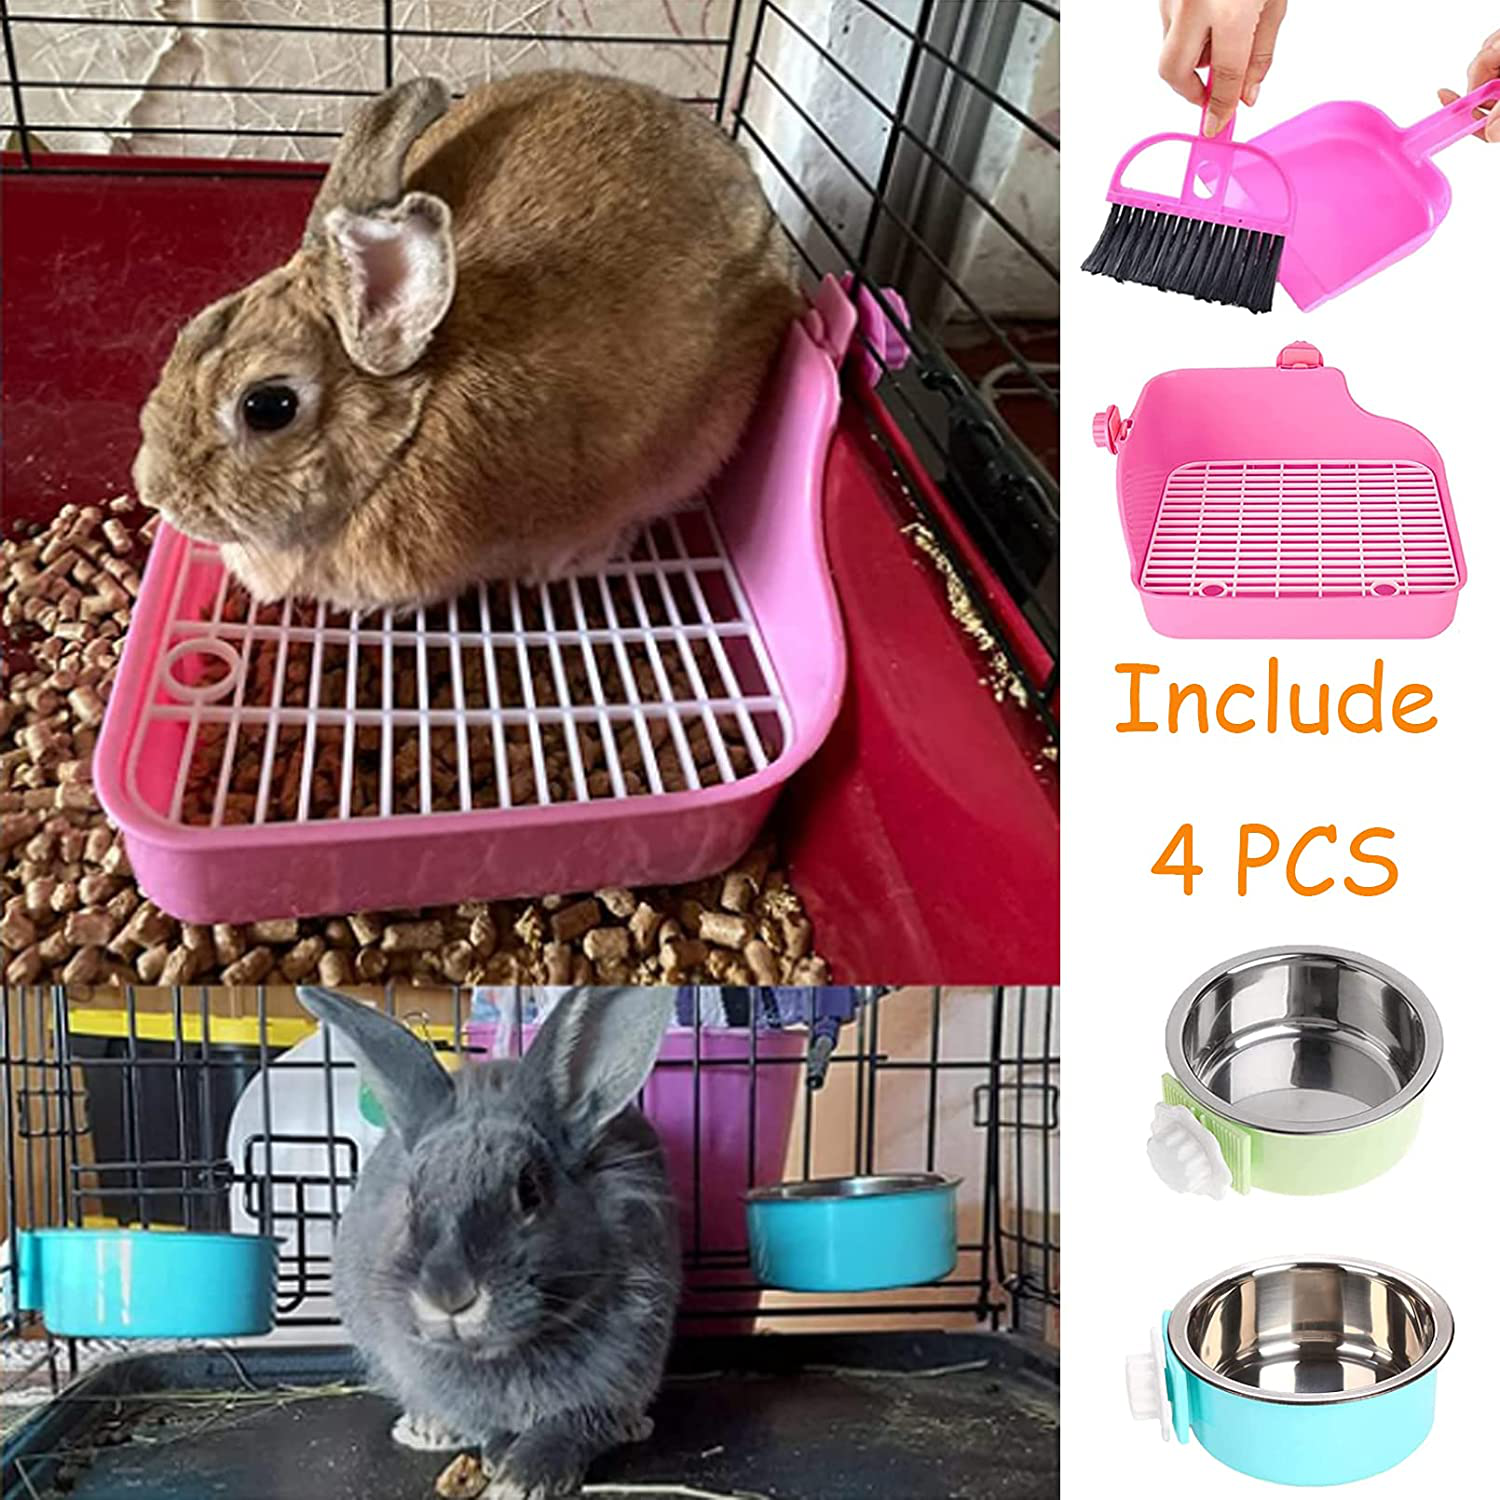 PINVNBY Rabbit Litter Box for Cage Bunny Corner Litter Bedding Box Small Animal Litter Pan Hanging Pet Bowls Cage Potty Trainer Pet Toilet for Rabbit Bunny Guinea Pigs Chinchilla Ferret Small Animals